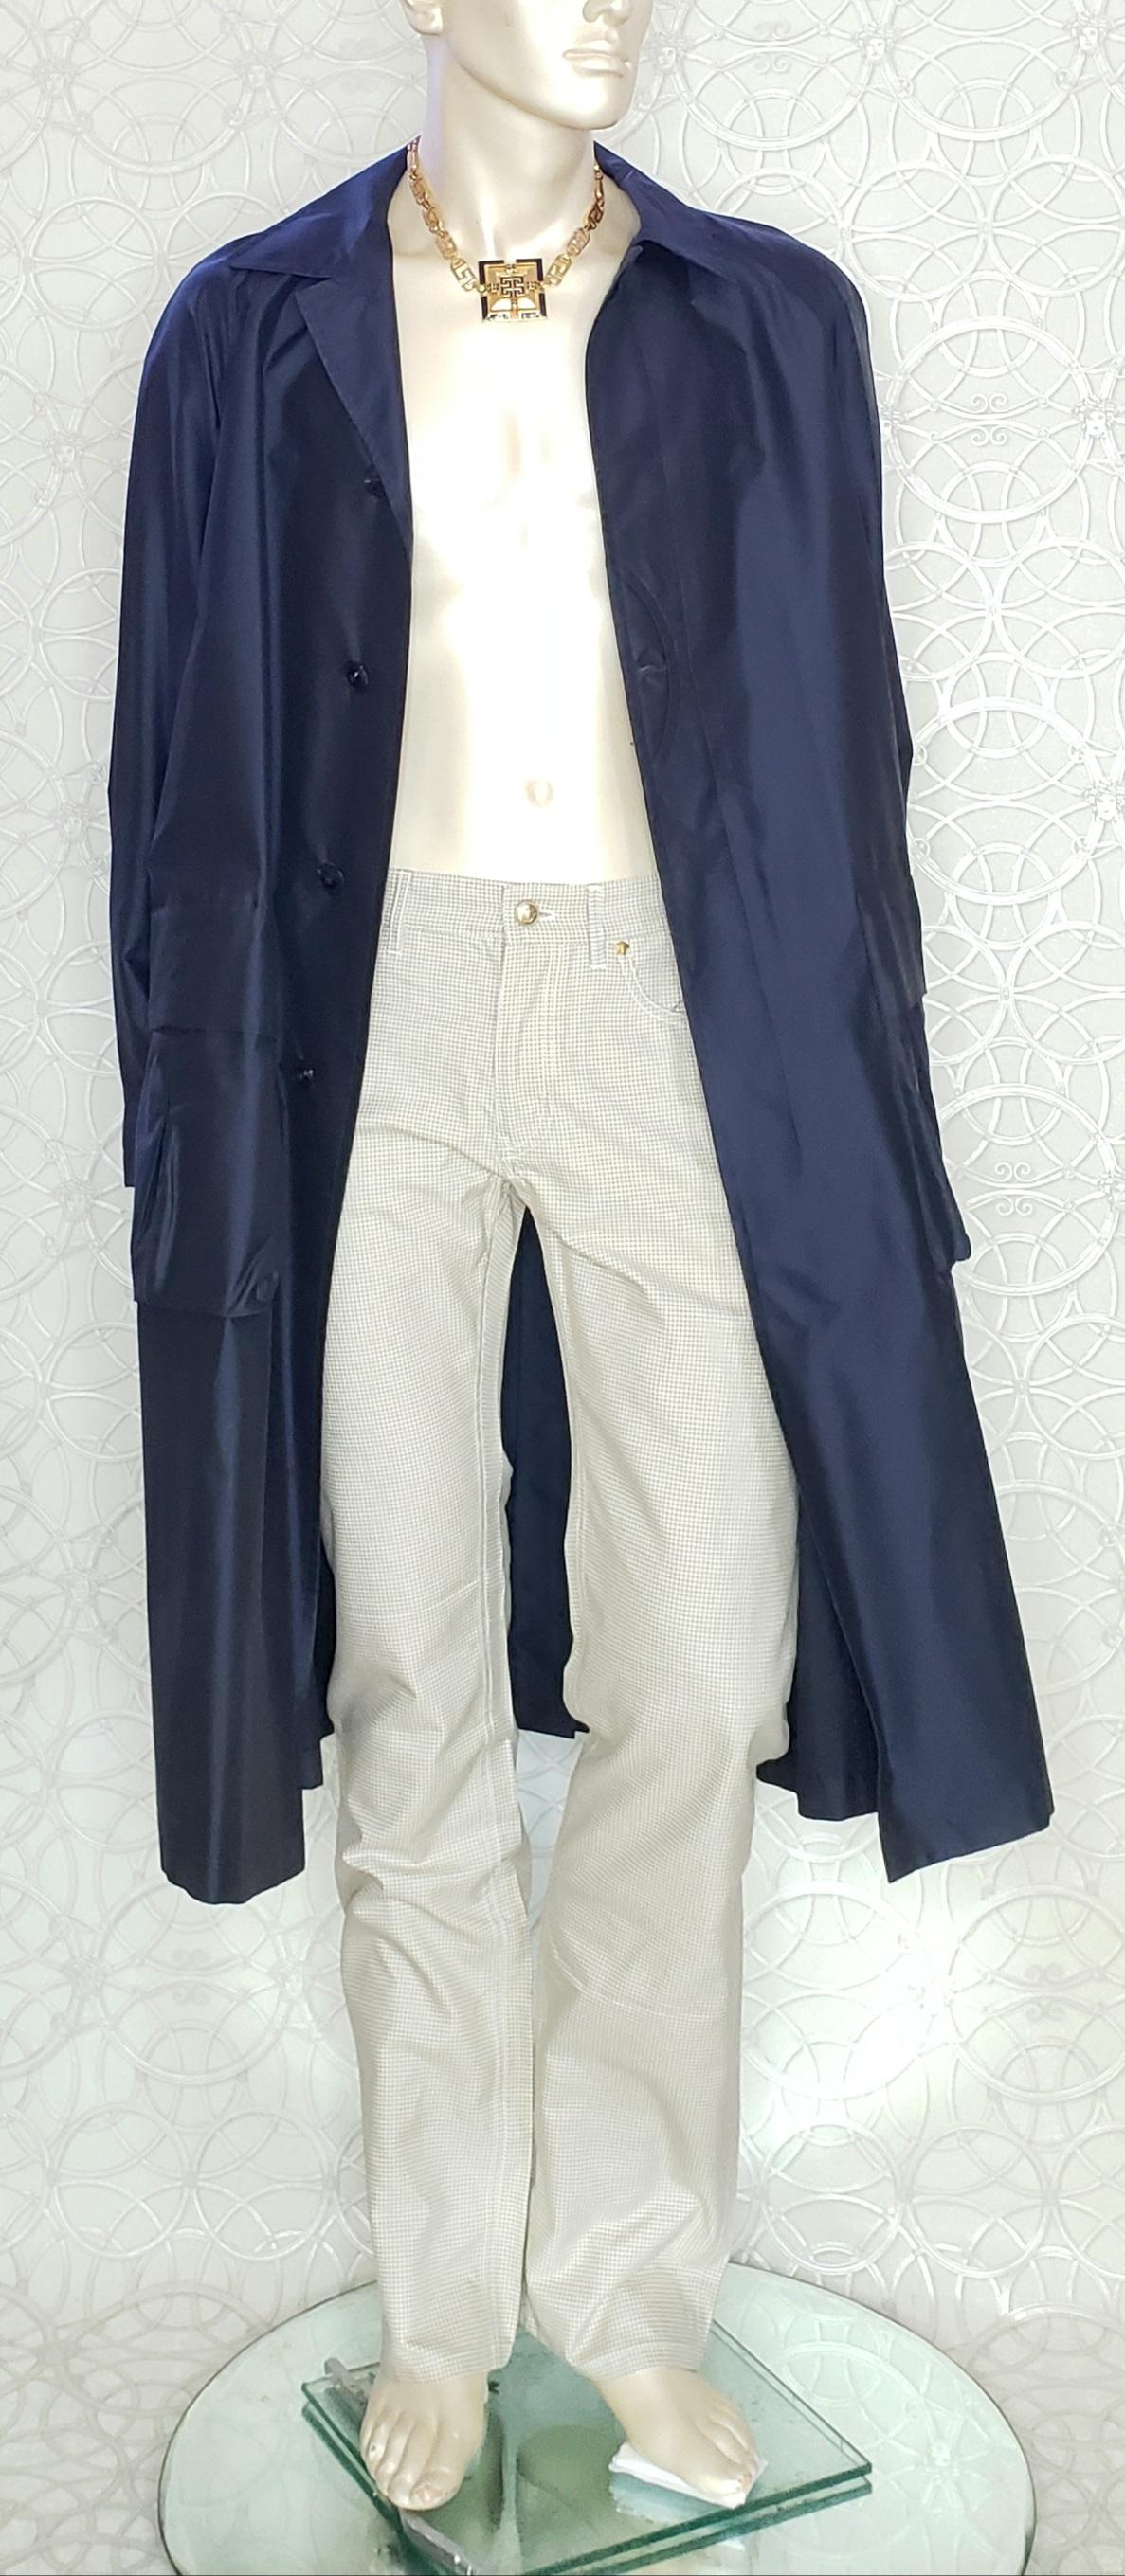 Blue S/S 2016 Look # 34 VERSACE BELTED NAVY BLUE TRENCH SILK COAT 50 - 40 For Sale